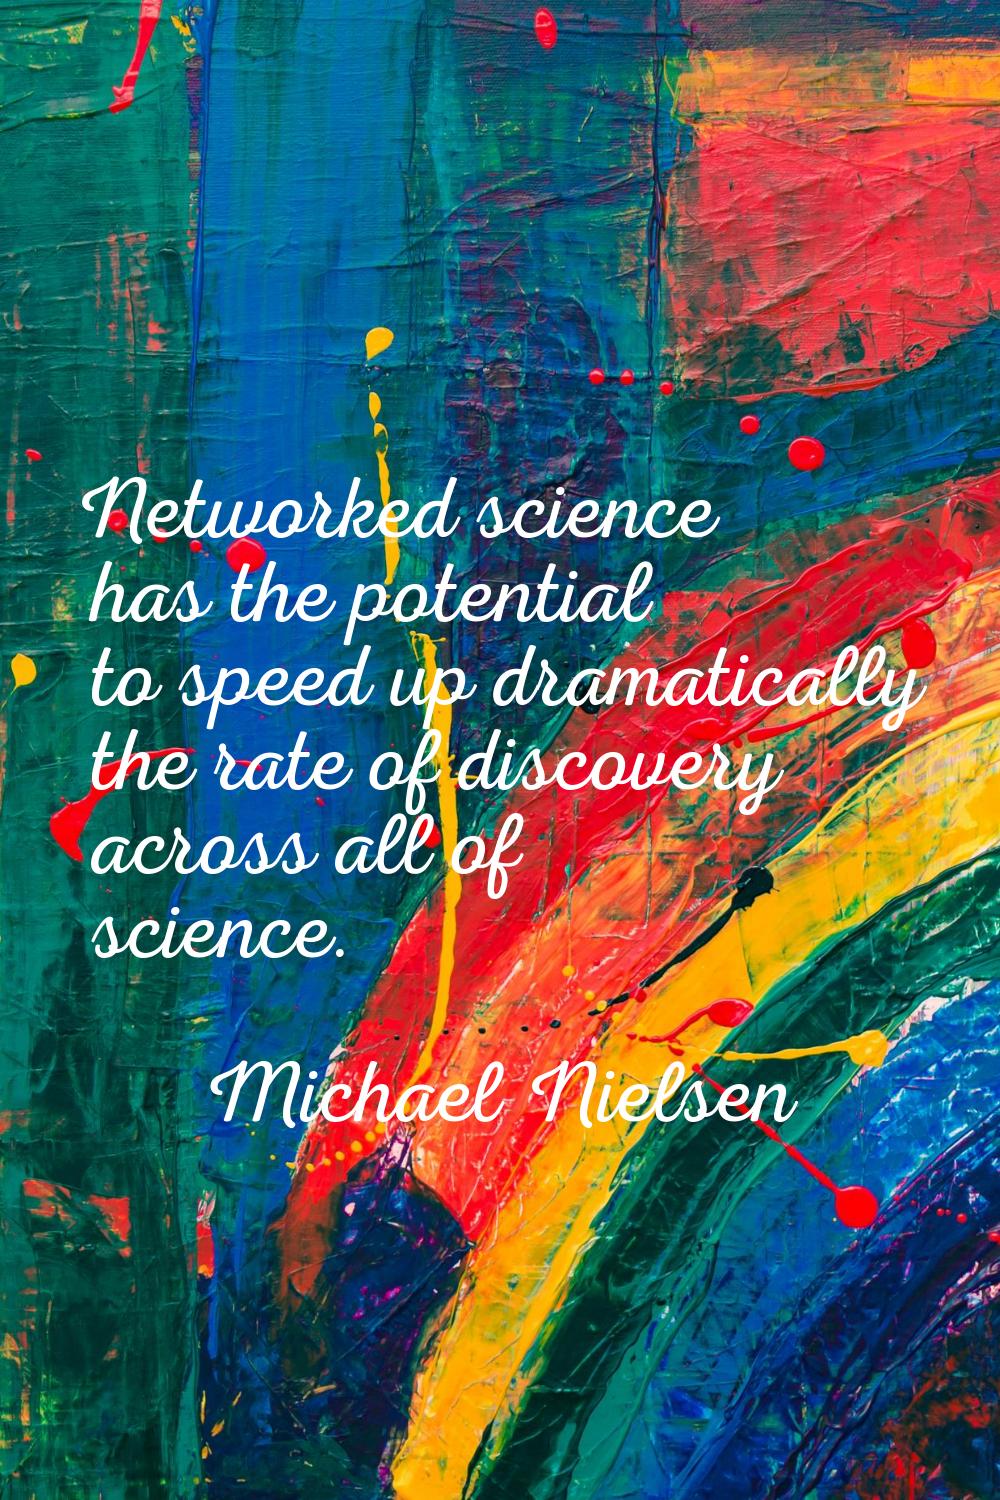 Networked science has the potential to speed up dramatically the rate of discovery across all of sc